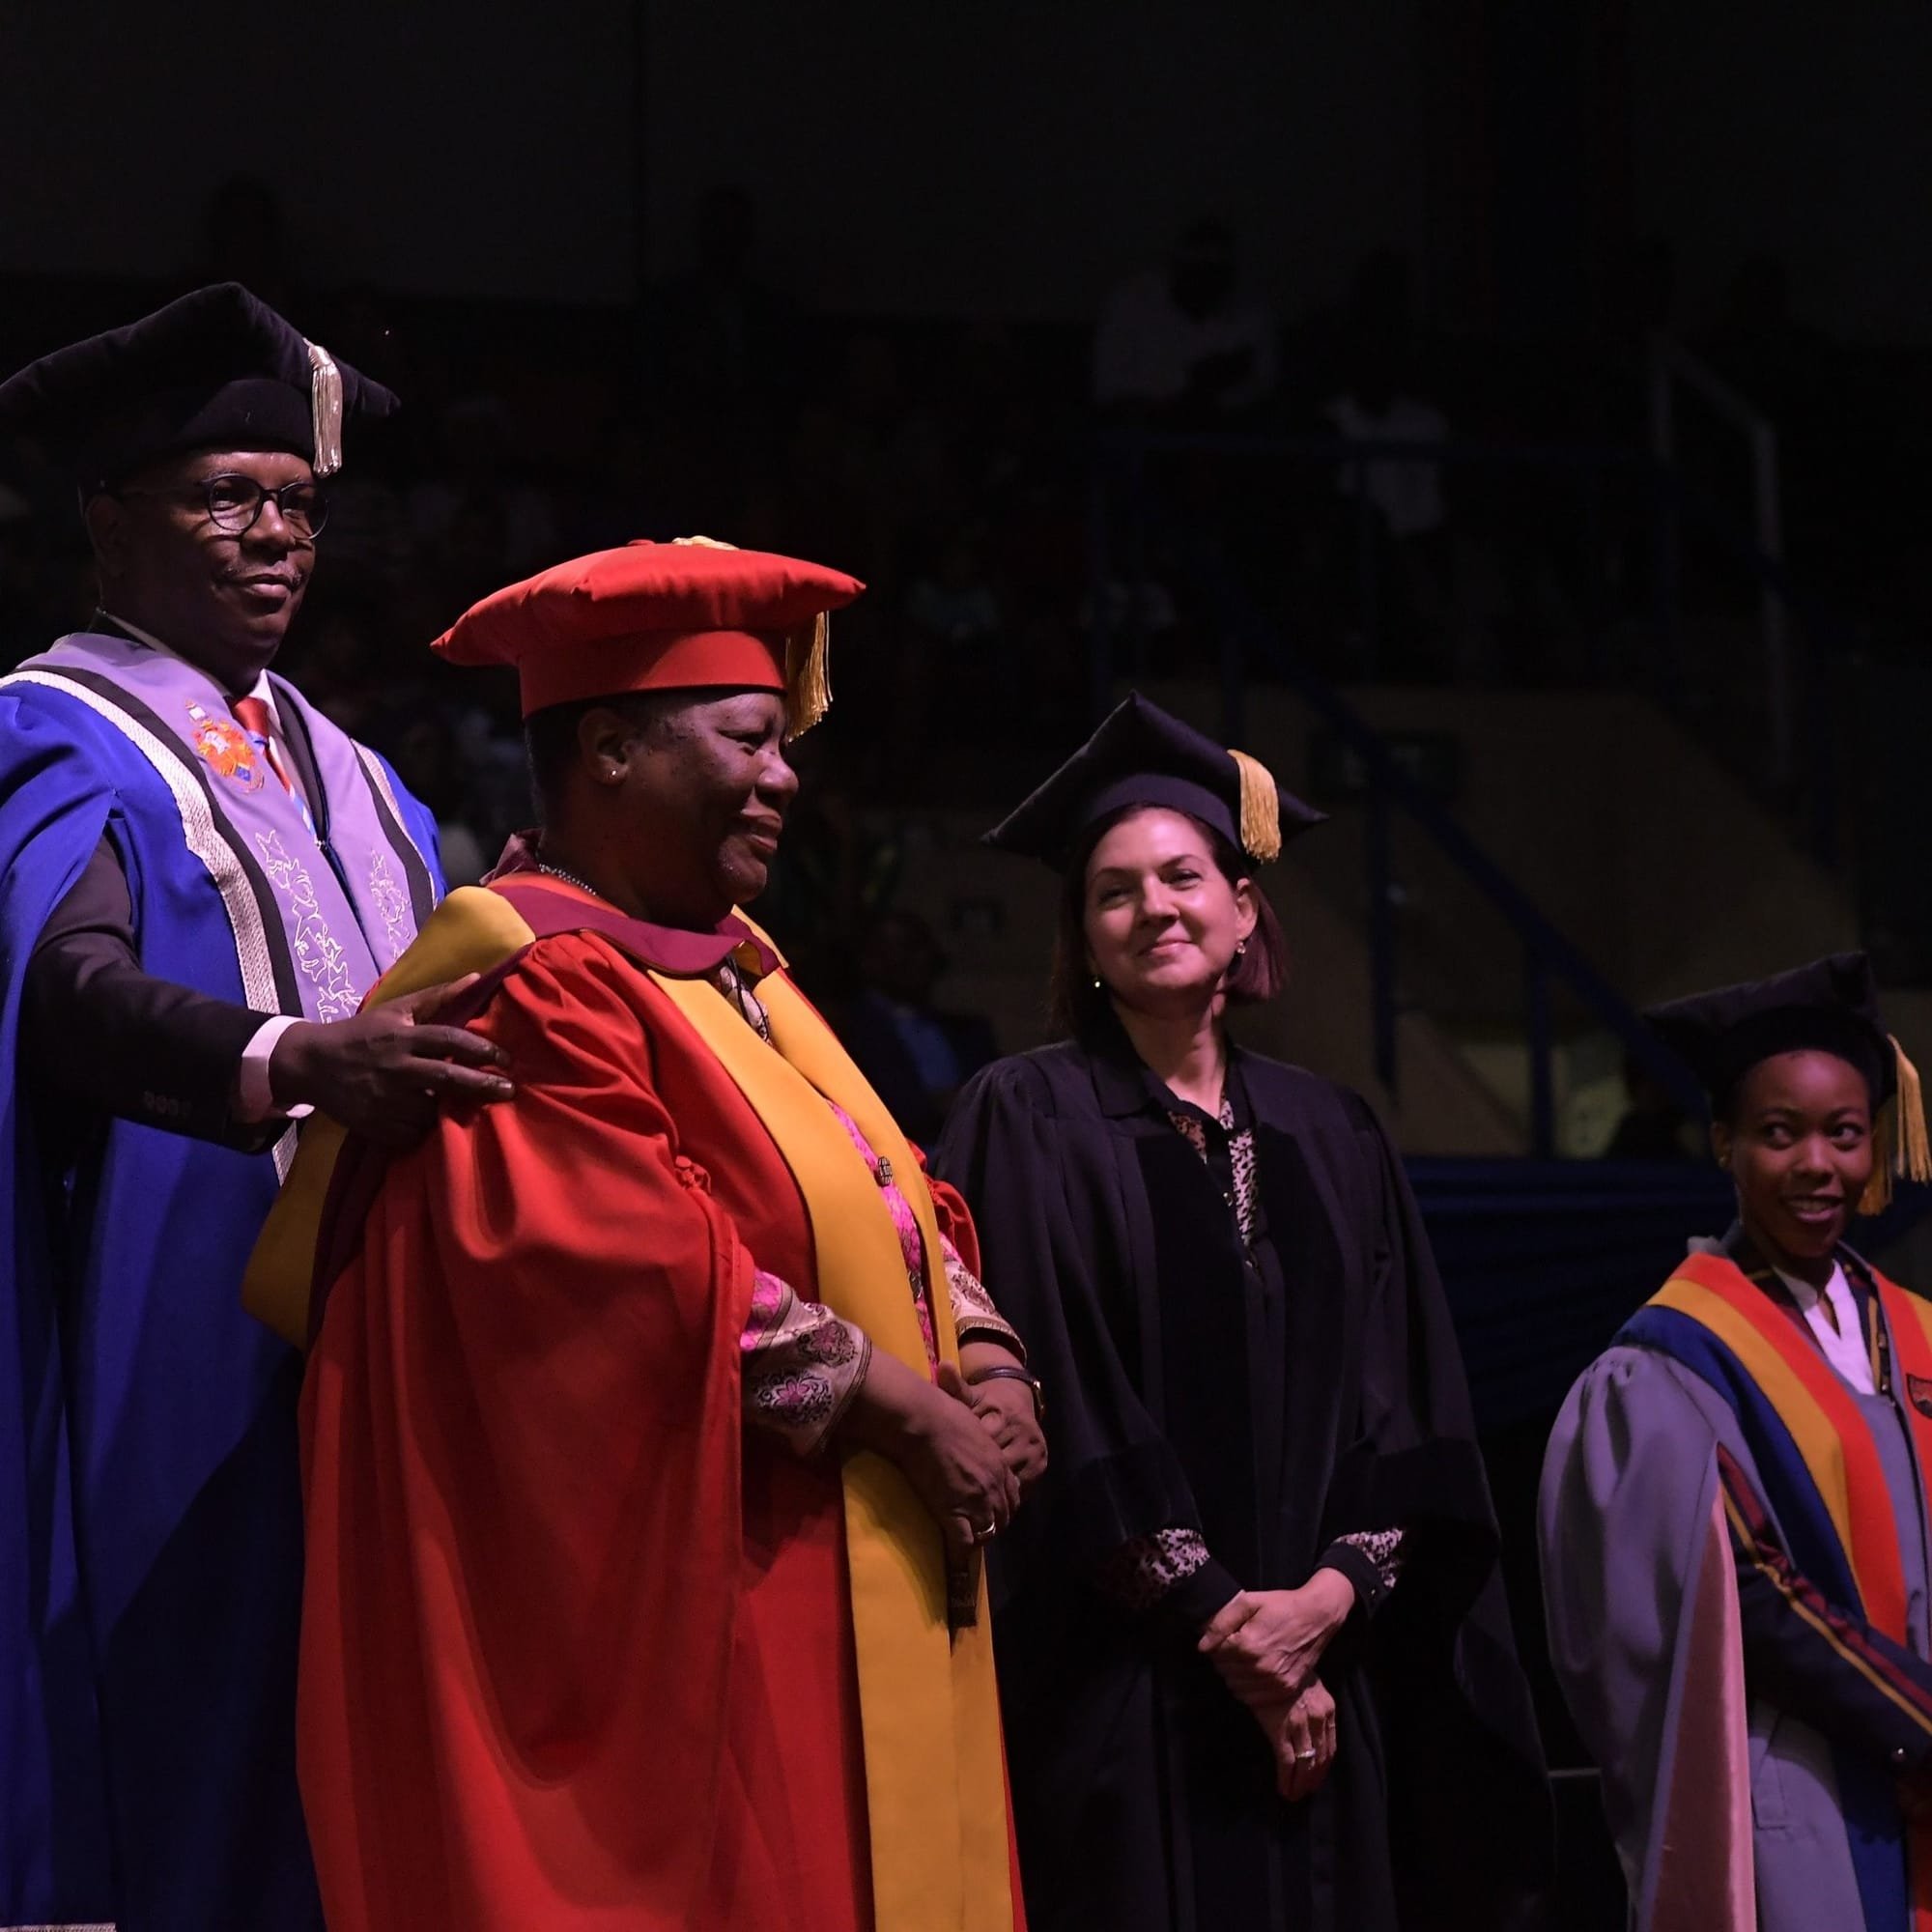 Minister Naledi Pandor is high in Education after receiving her PhD.